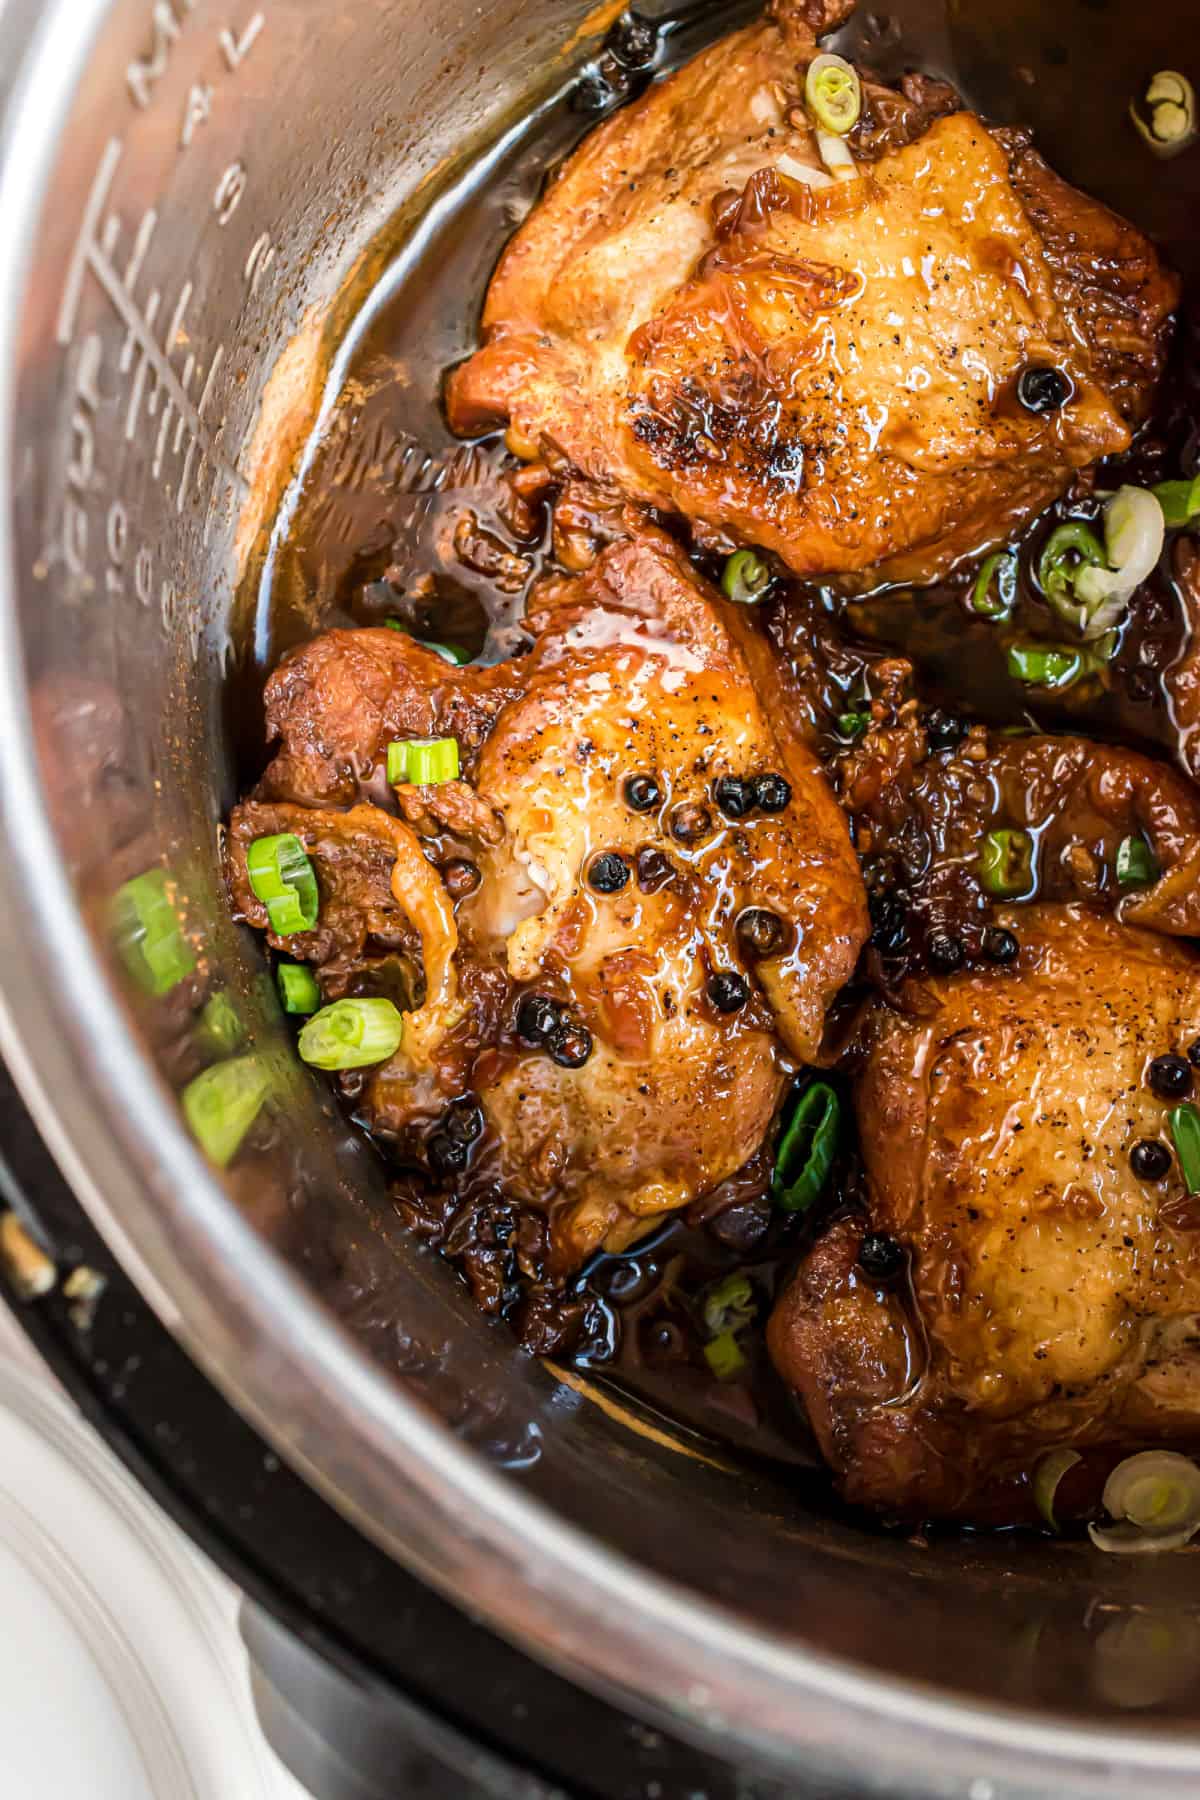 Chicken adobo cooked in the Instant Pot.